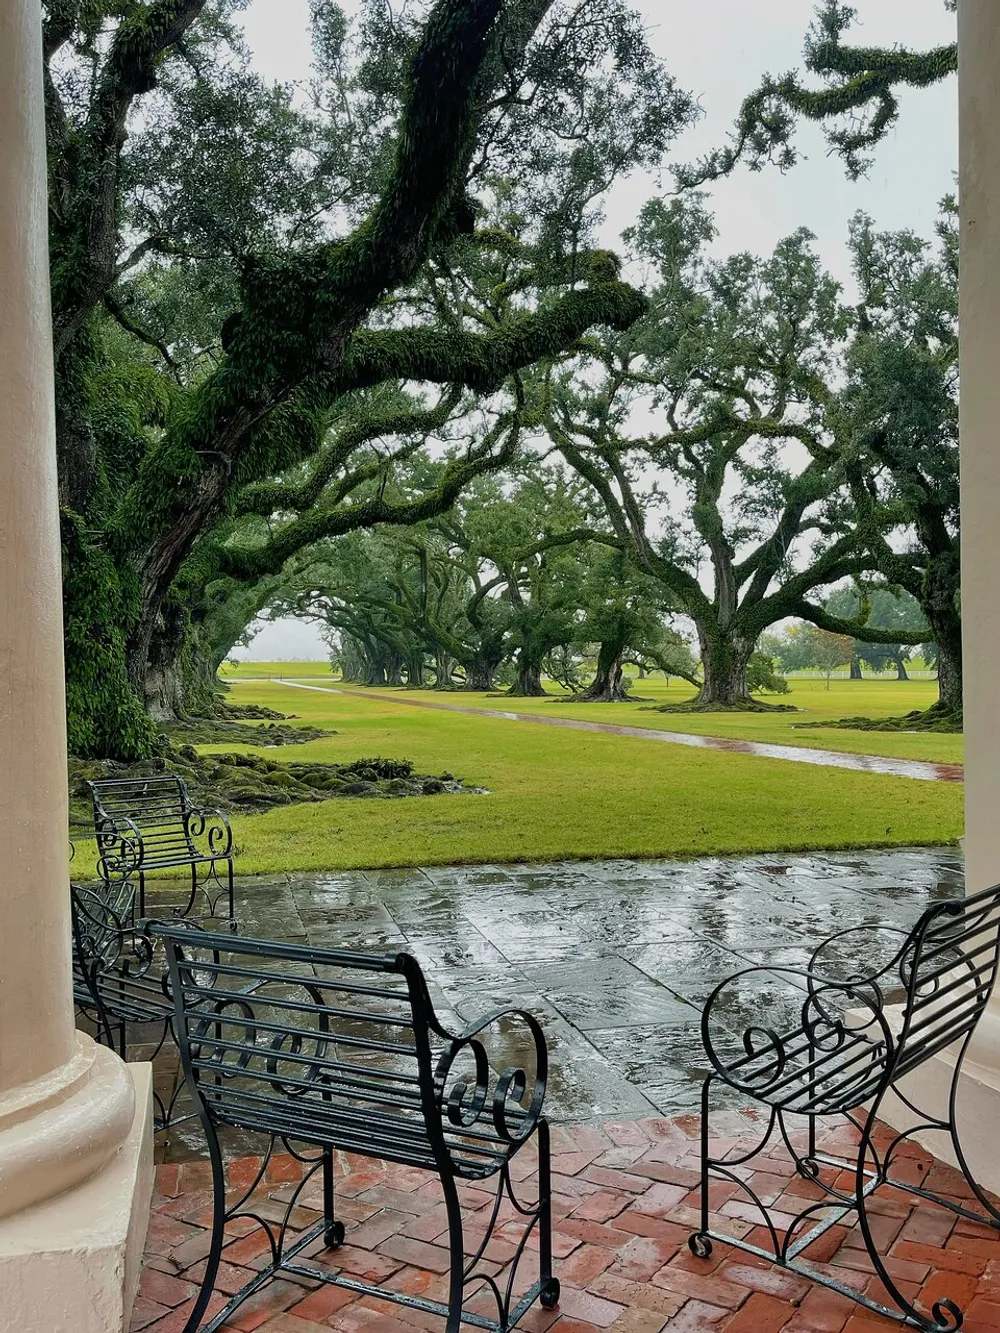 The photo shows a serene view from a sheltered patio with metal benches looking out onto a lush lawn with majestic moss-covered trees under a cloudy sky